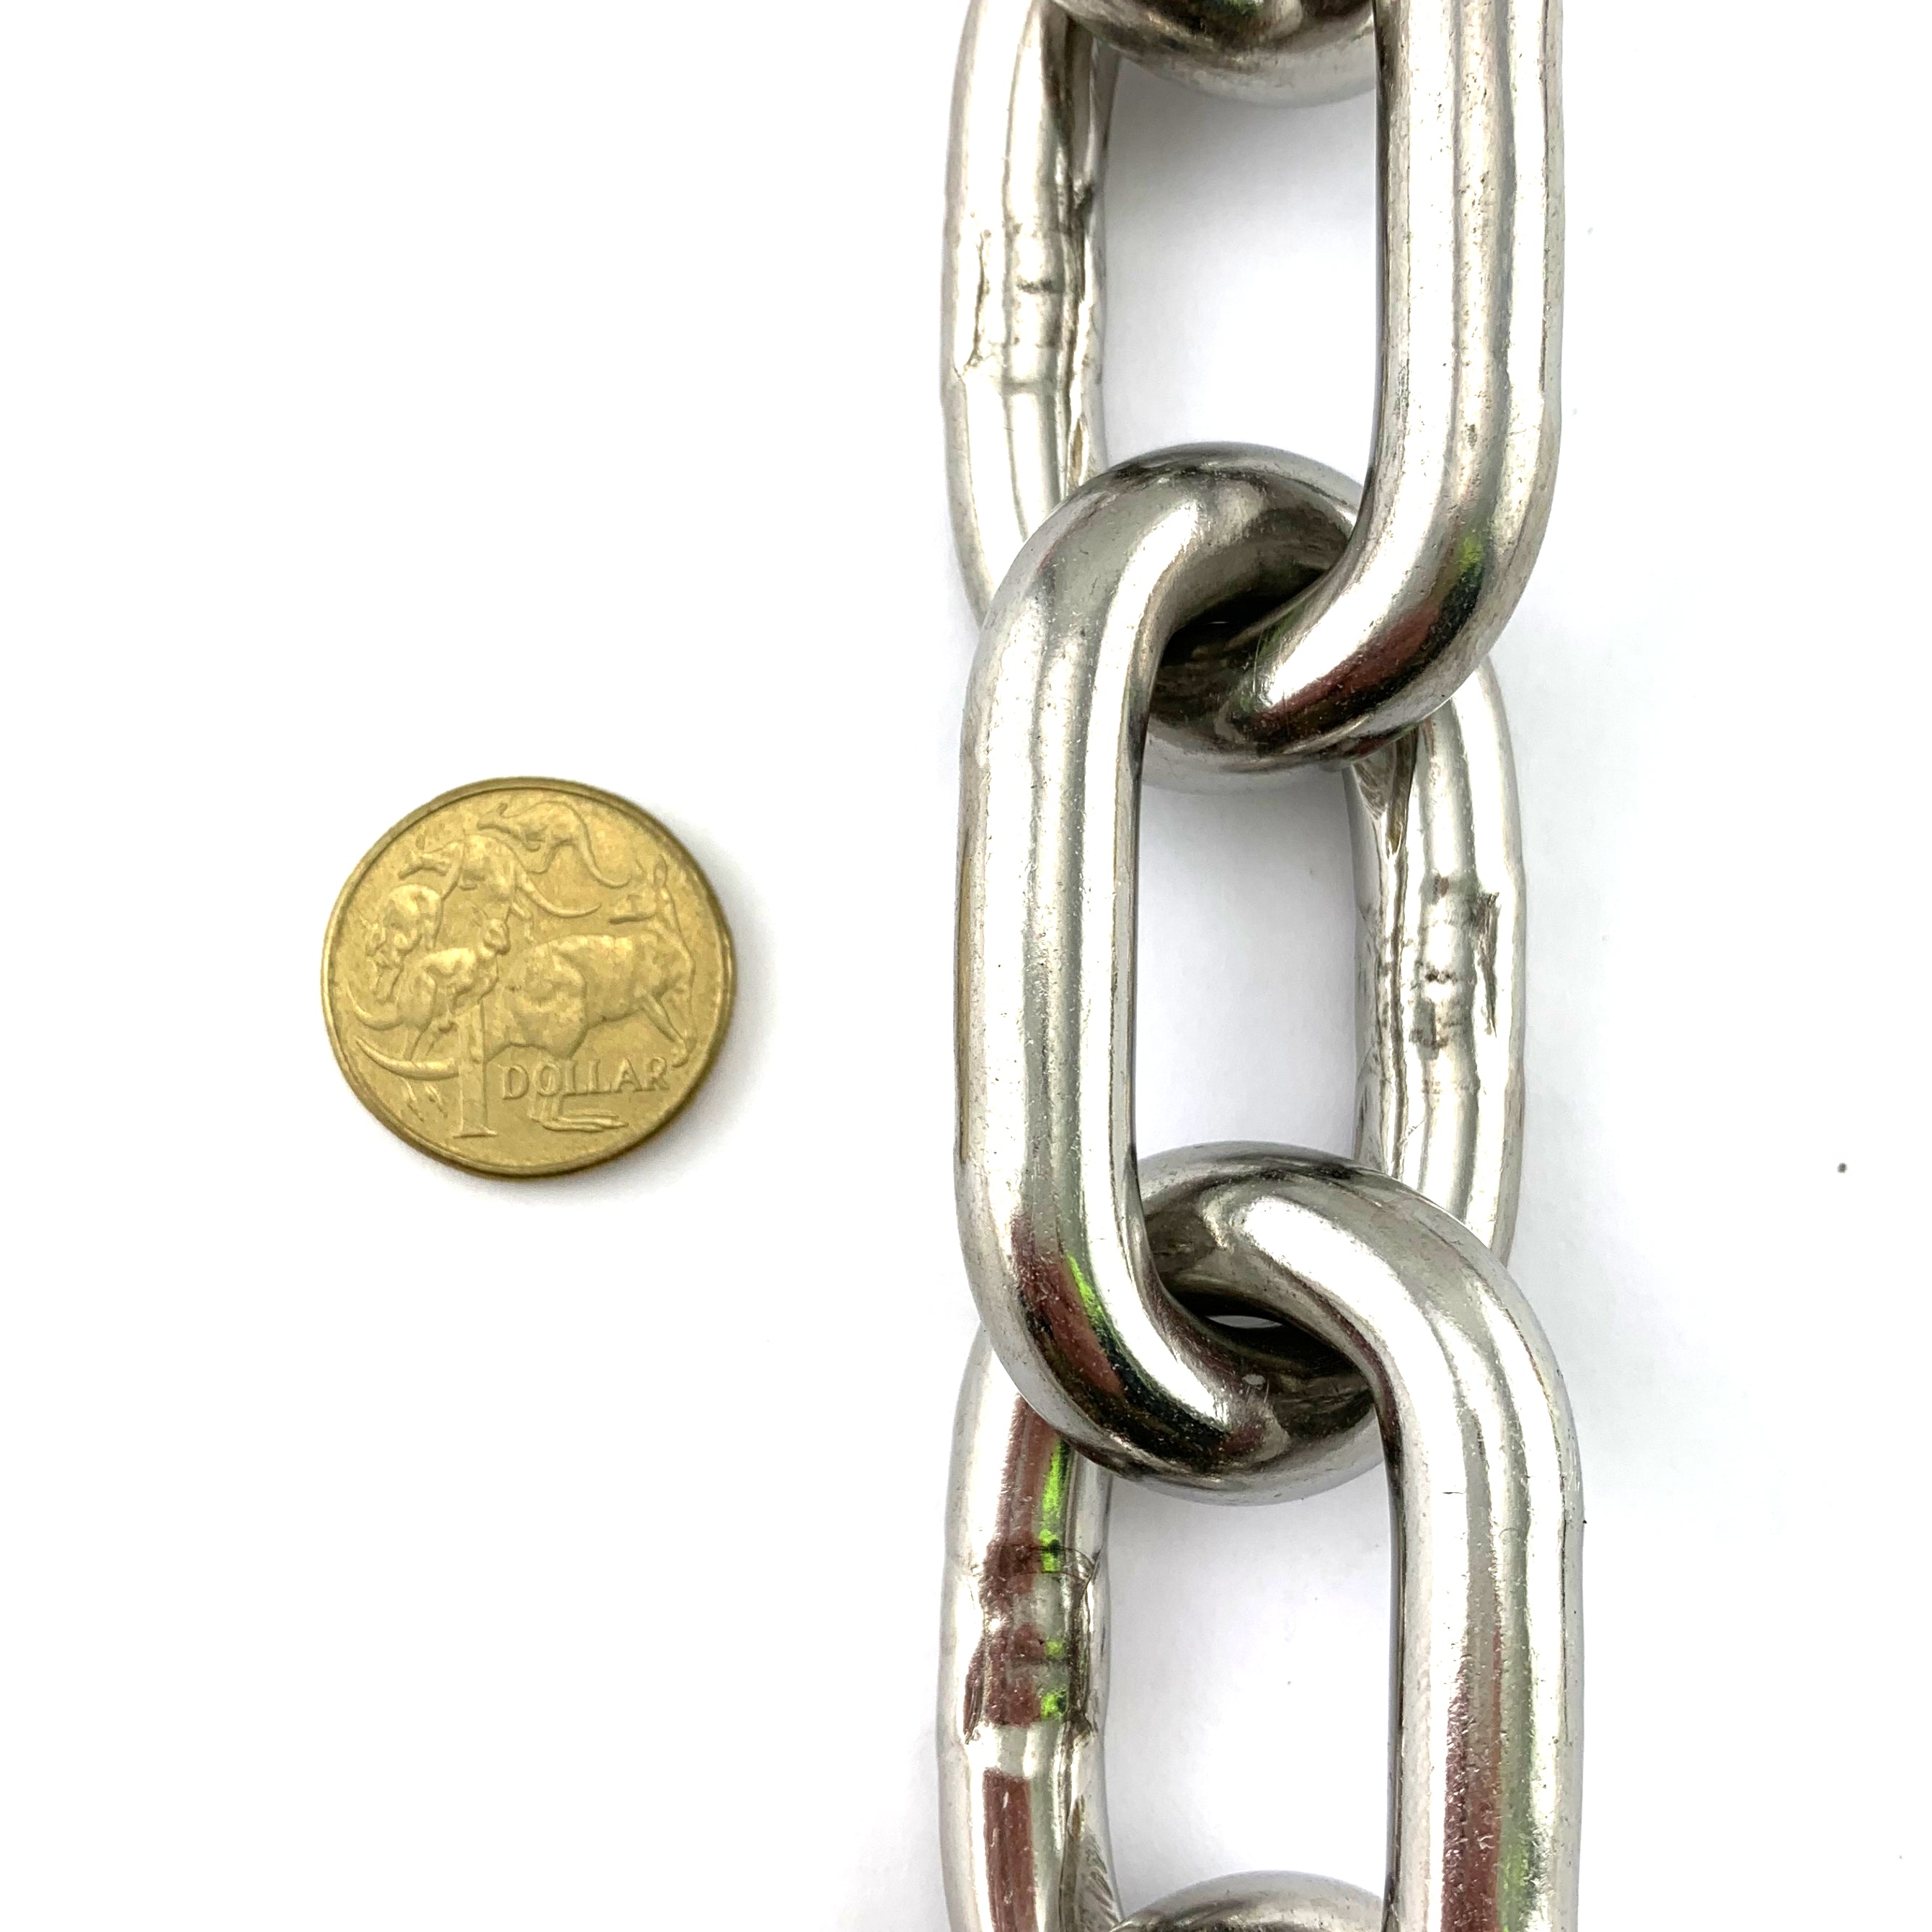 10mm stainless steel welded link chain. Order chain by the metre. Melbourne, Australia.